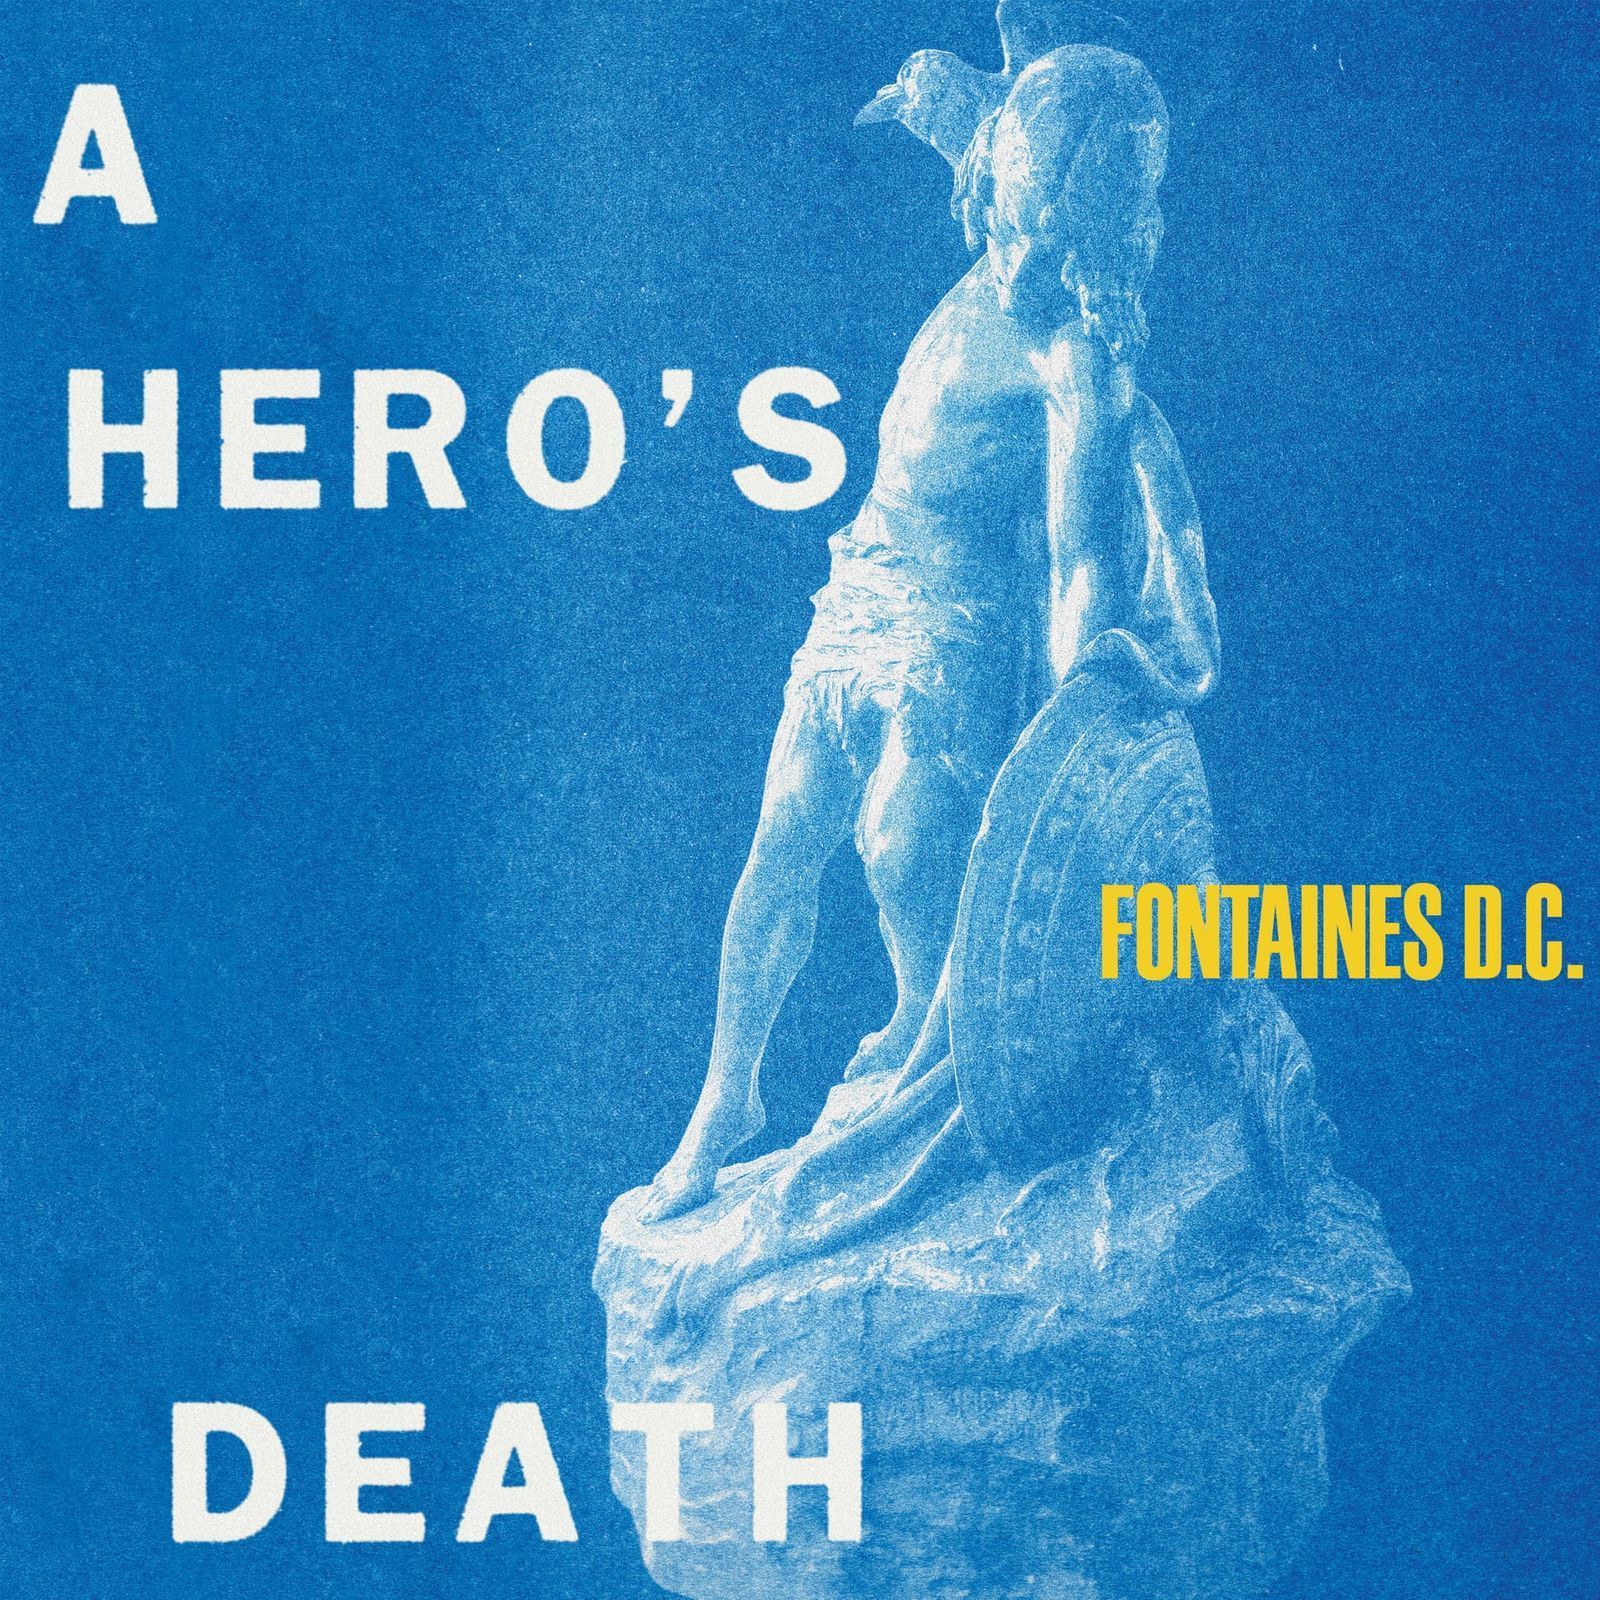 Fontaines D.C.: A Hero’s Death